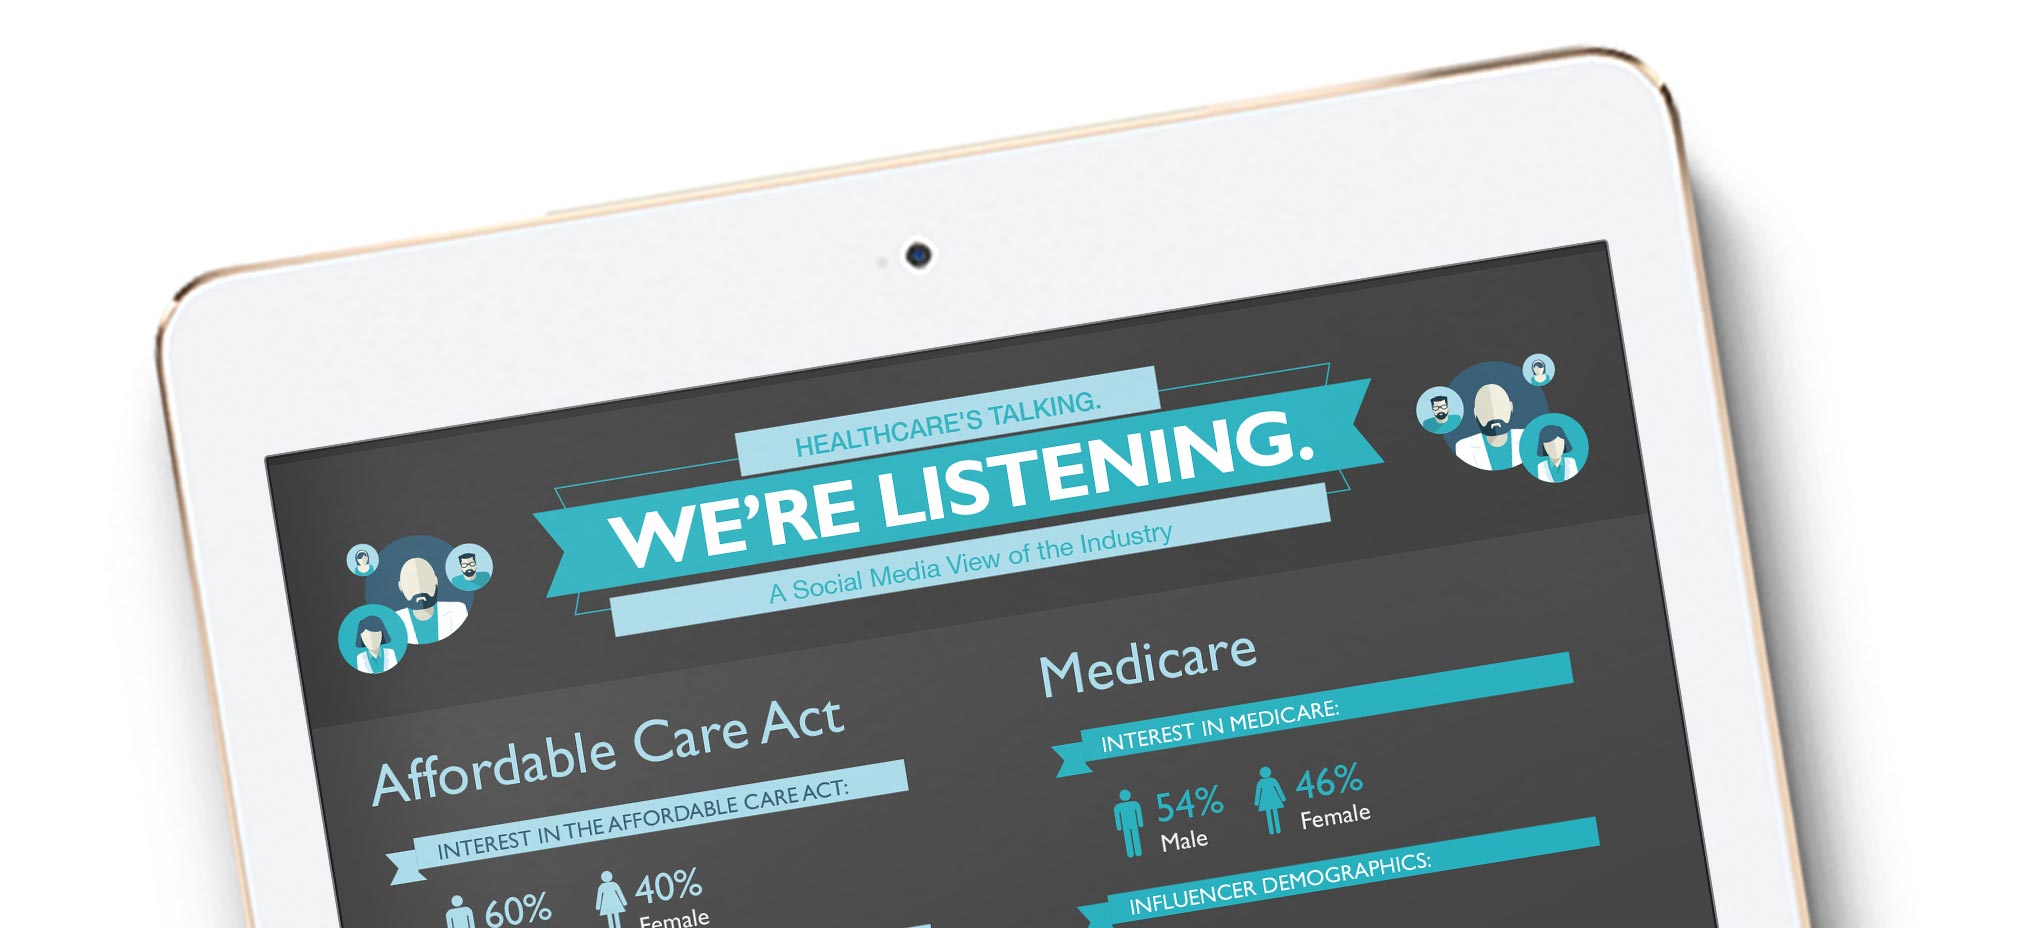 Healthcare’s Talking, We’re Listening: A Social Media View of the Industry